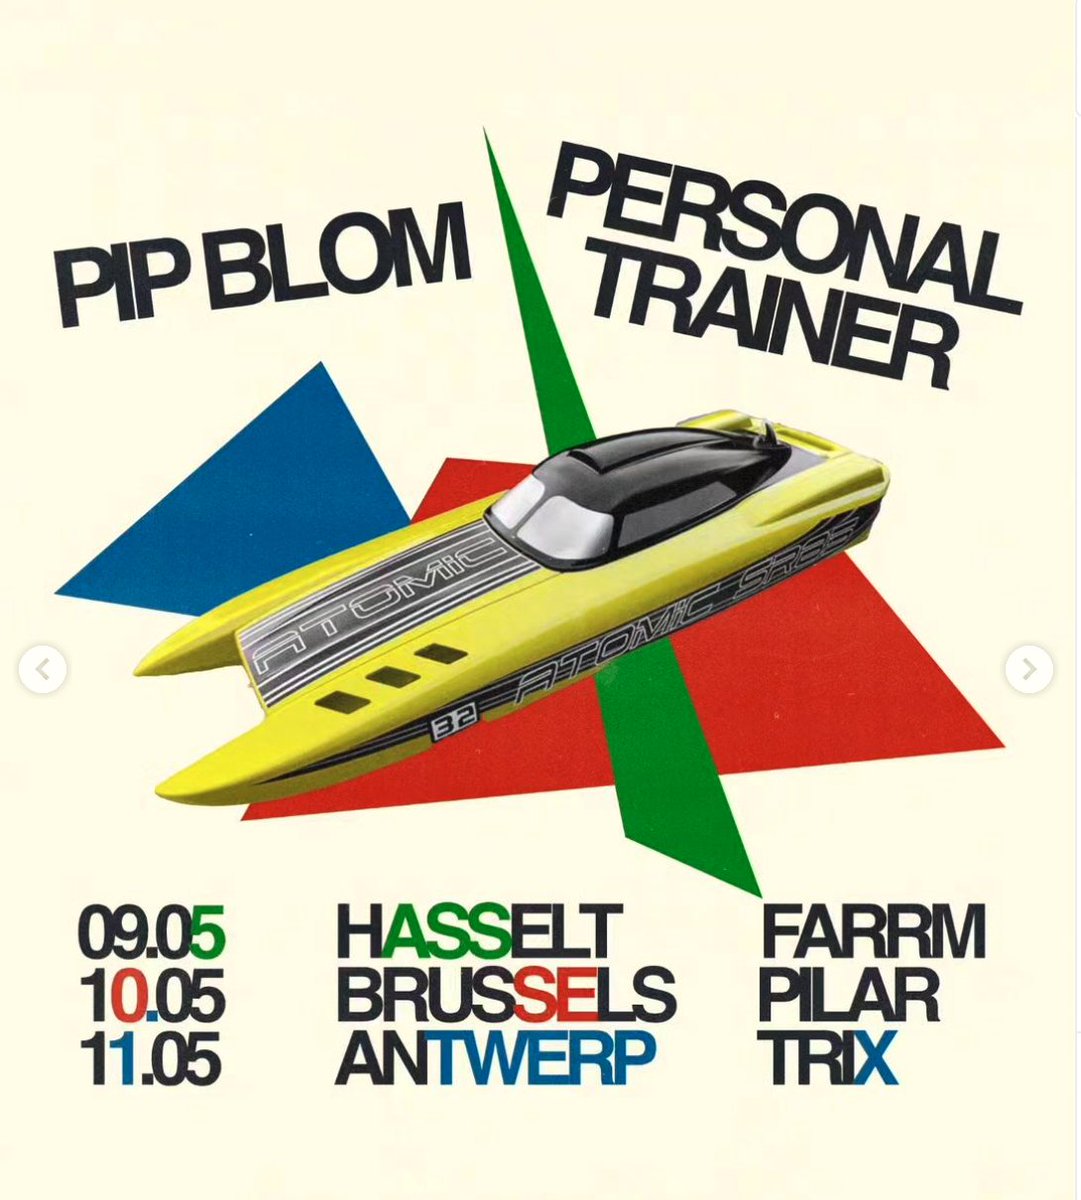 We're back on the road! Together with our friends from @prsnl_trnr we're playing 3 shows in Belgium: Hasselt (9-5), Brussels (10-5), Antwerp (11-5). Come dance!